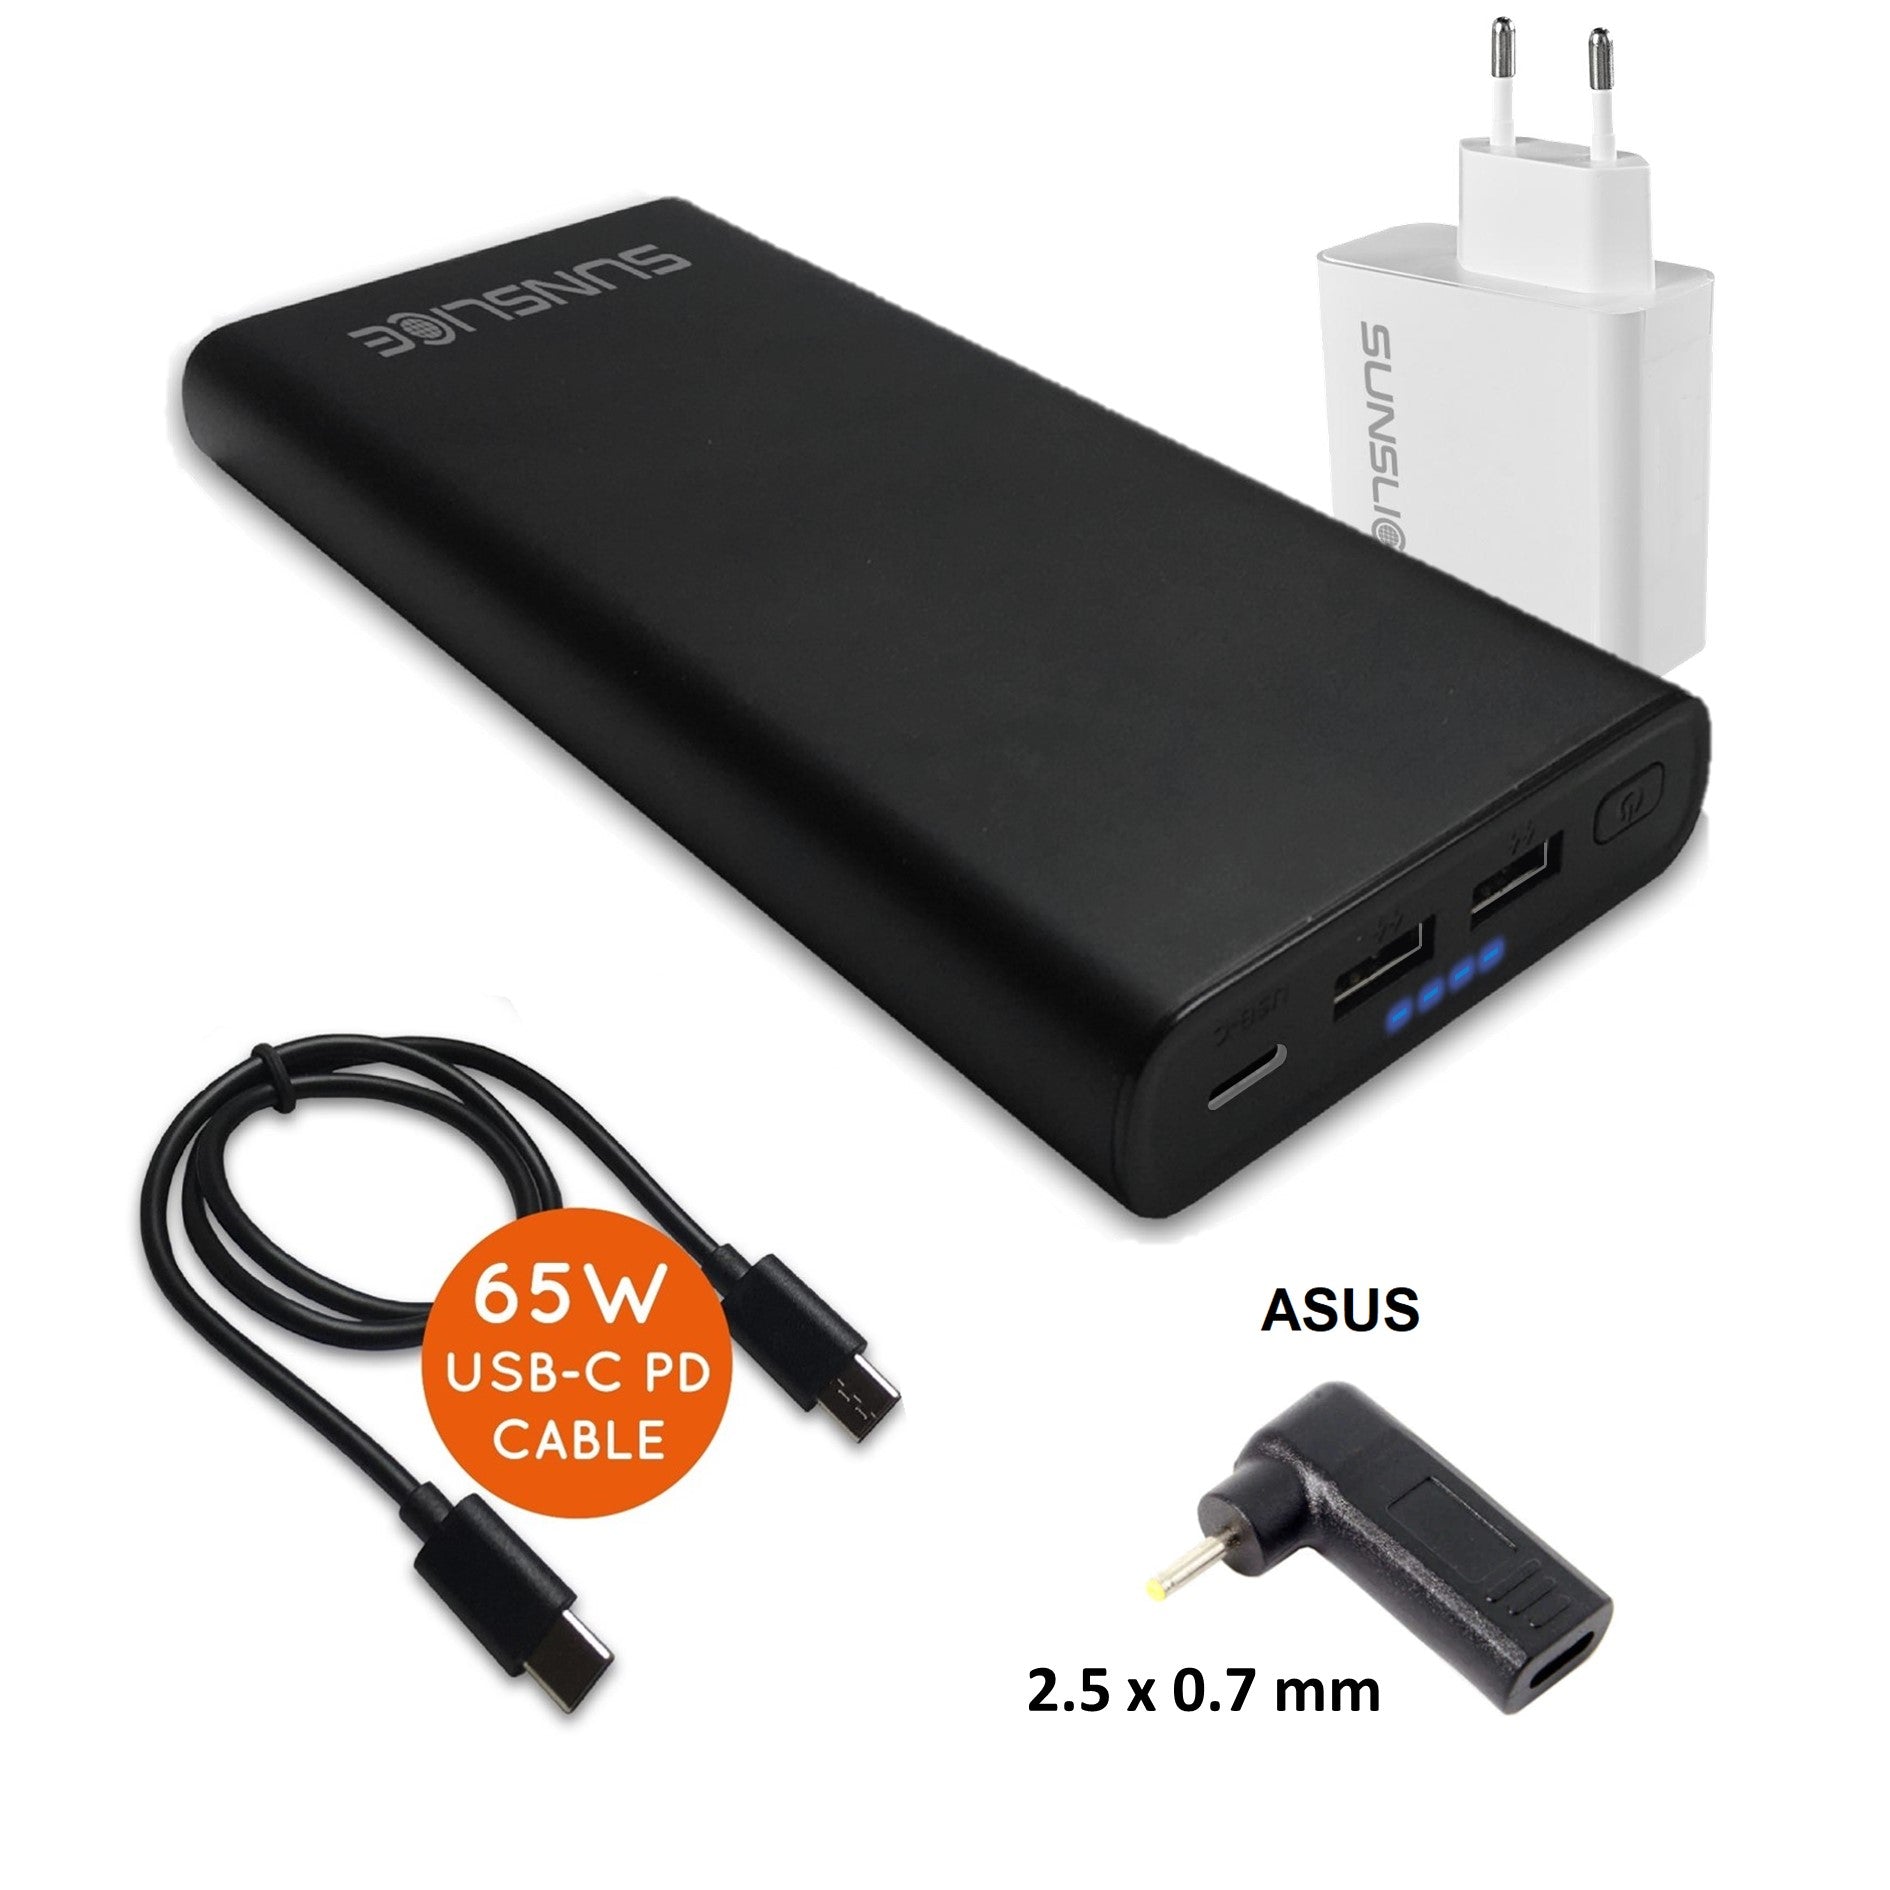 220V AC outlet Power bank | for drones and laptops - Gravity 756